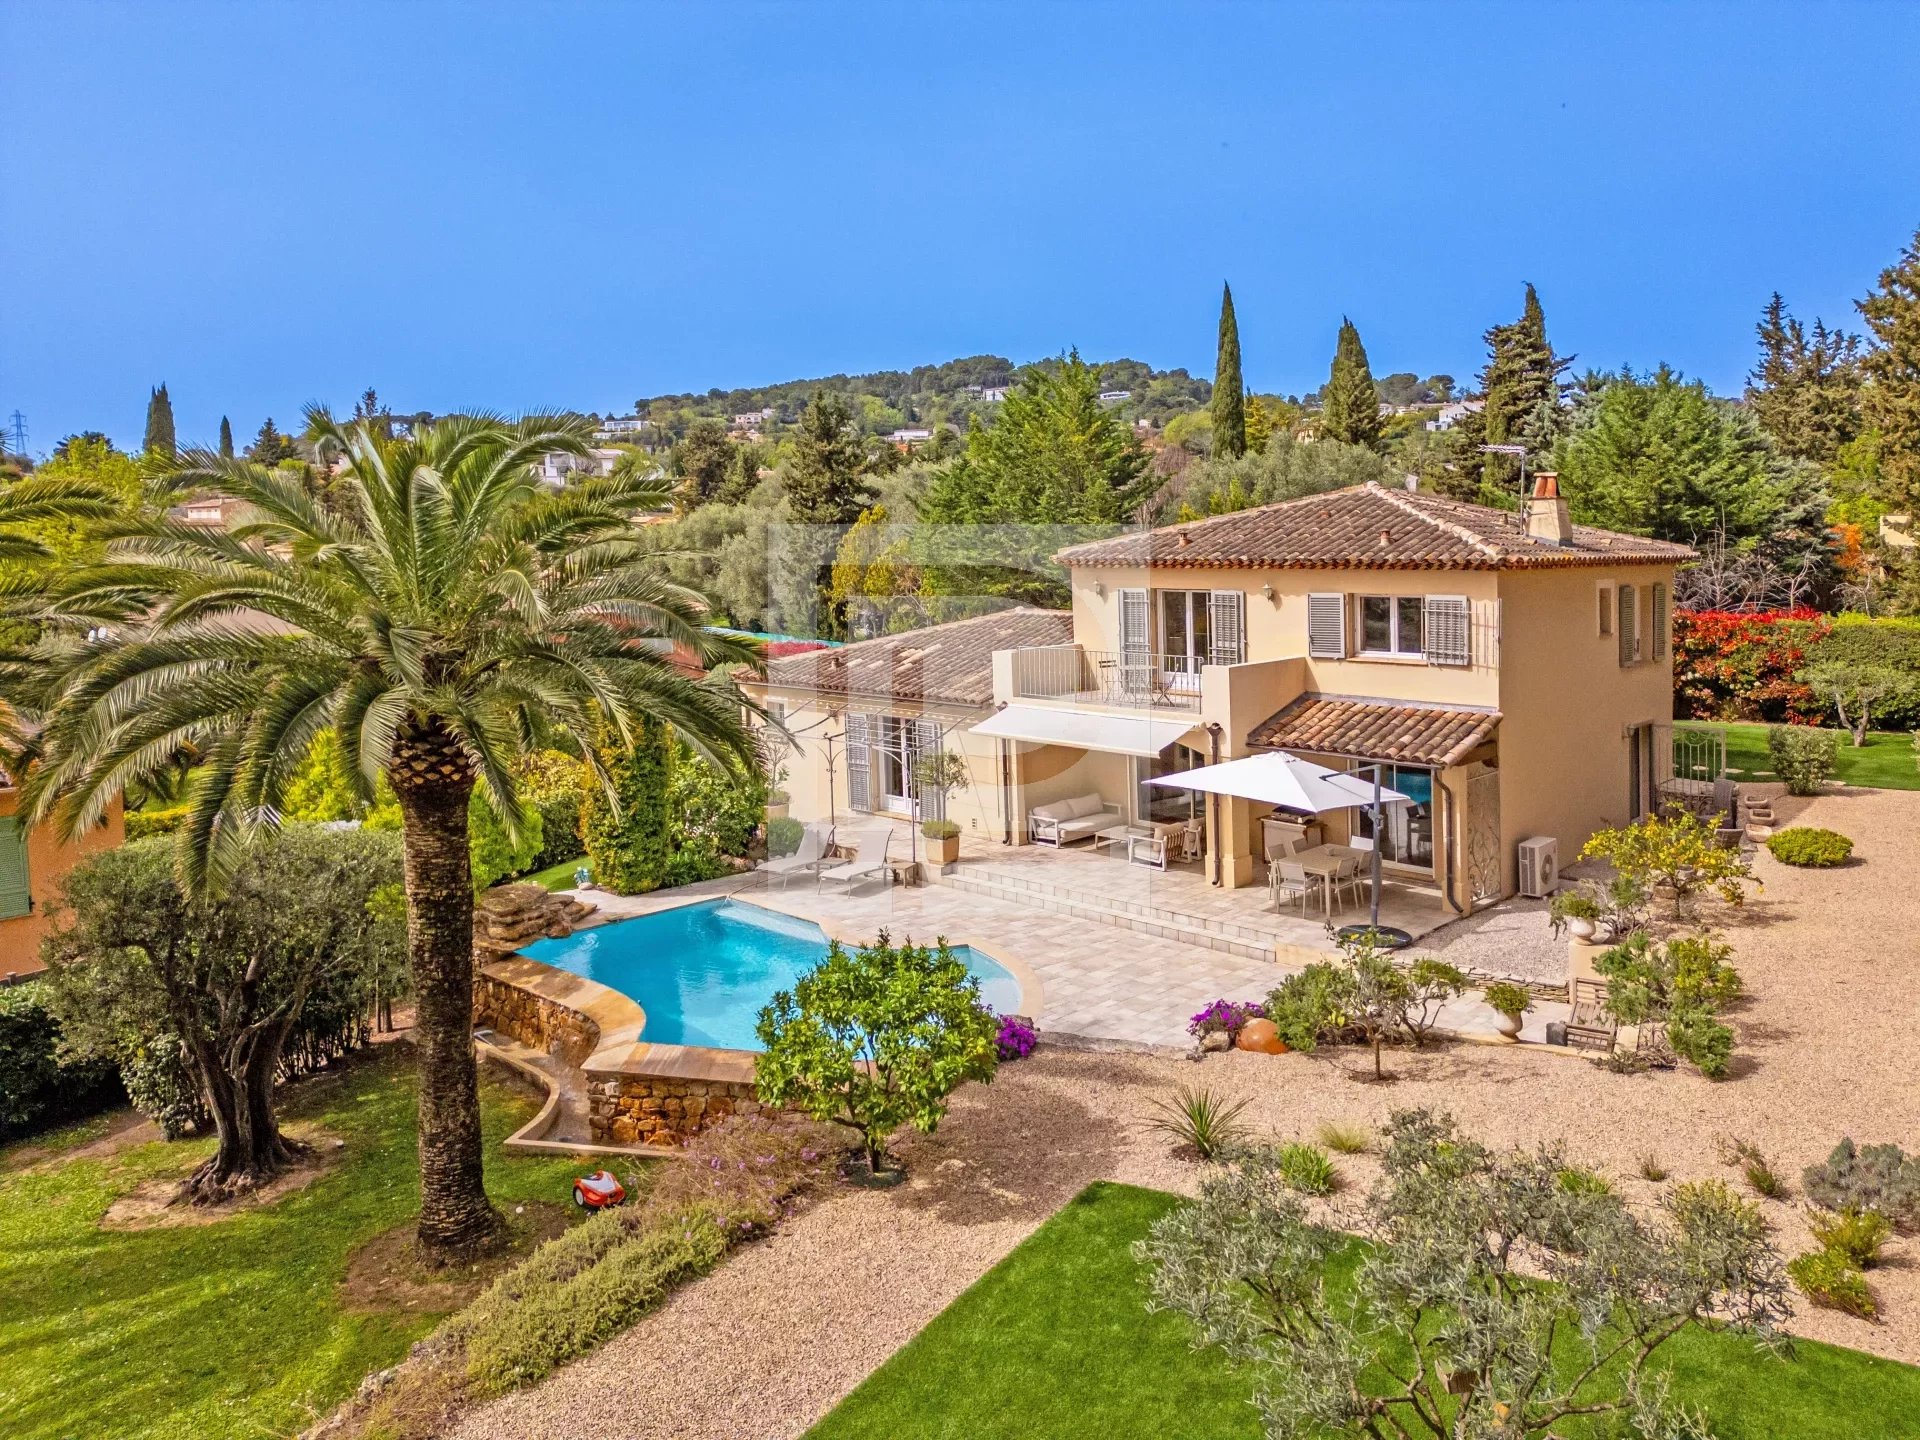 In a closed domain, charming villa with superb finishings in Mougins